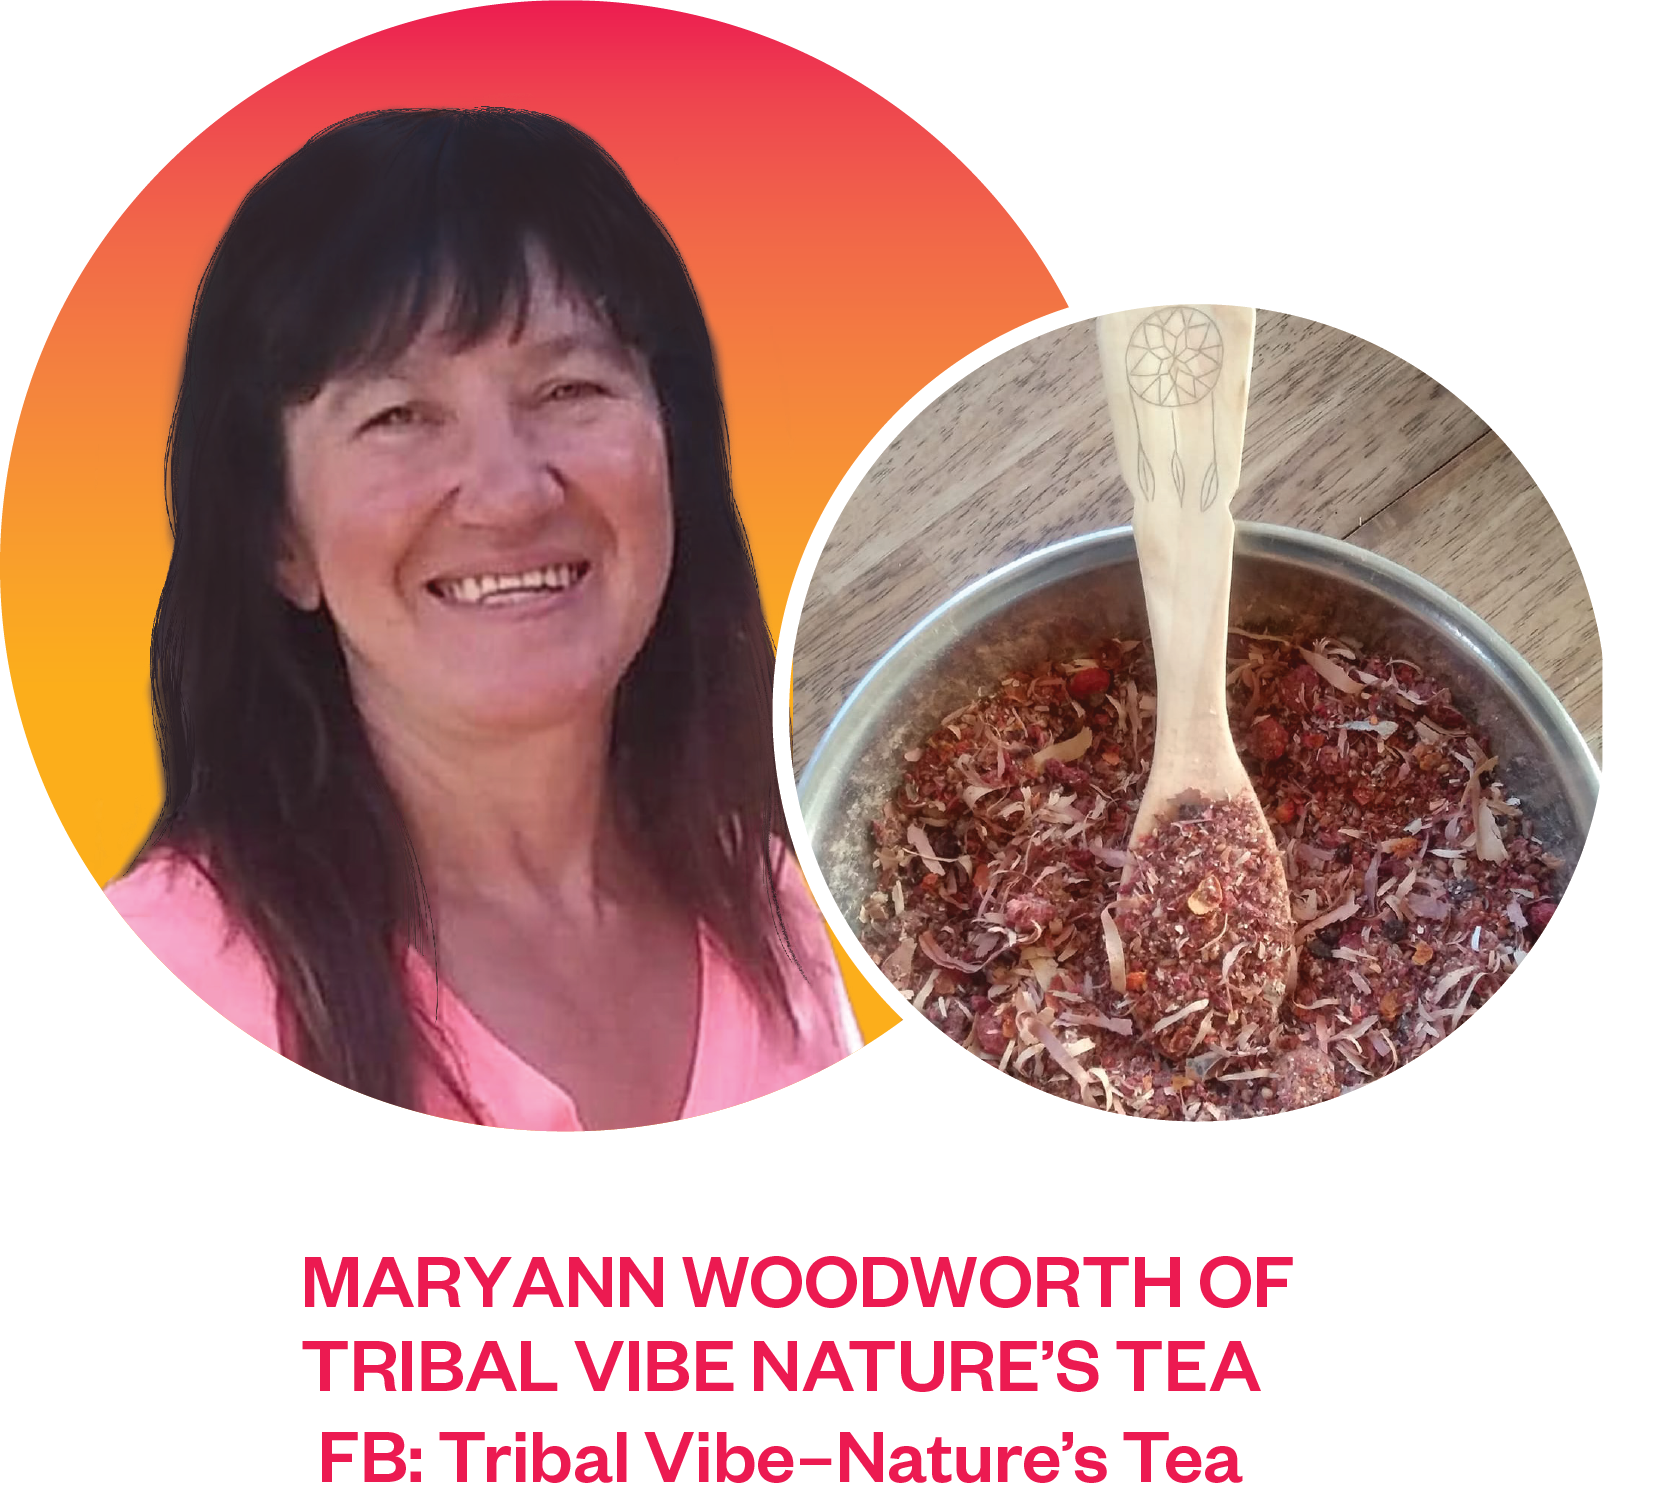 Circular image of Maryann smiling with pink and orange background overlapped by circular image of her hand-harvested dried tea blend